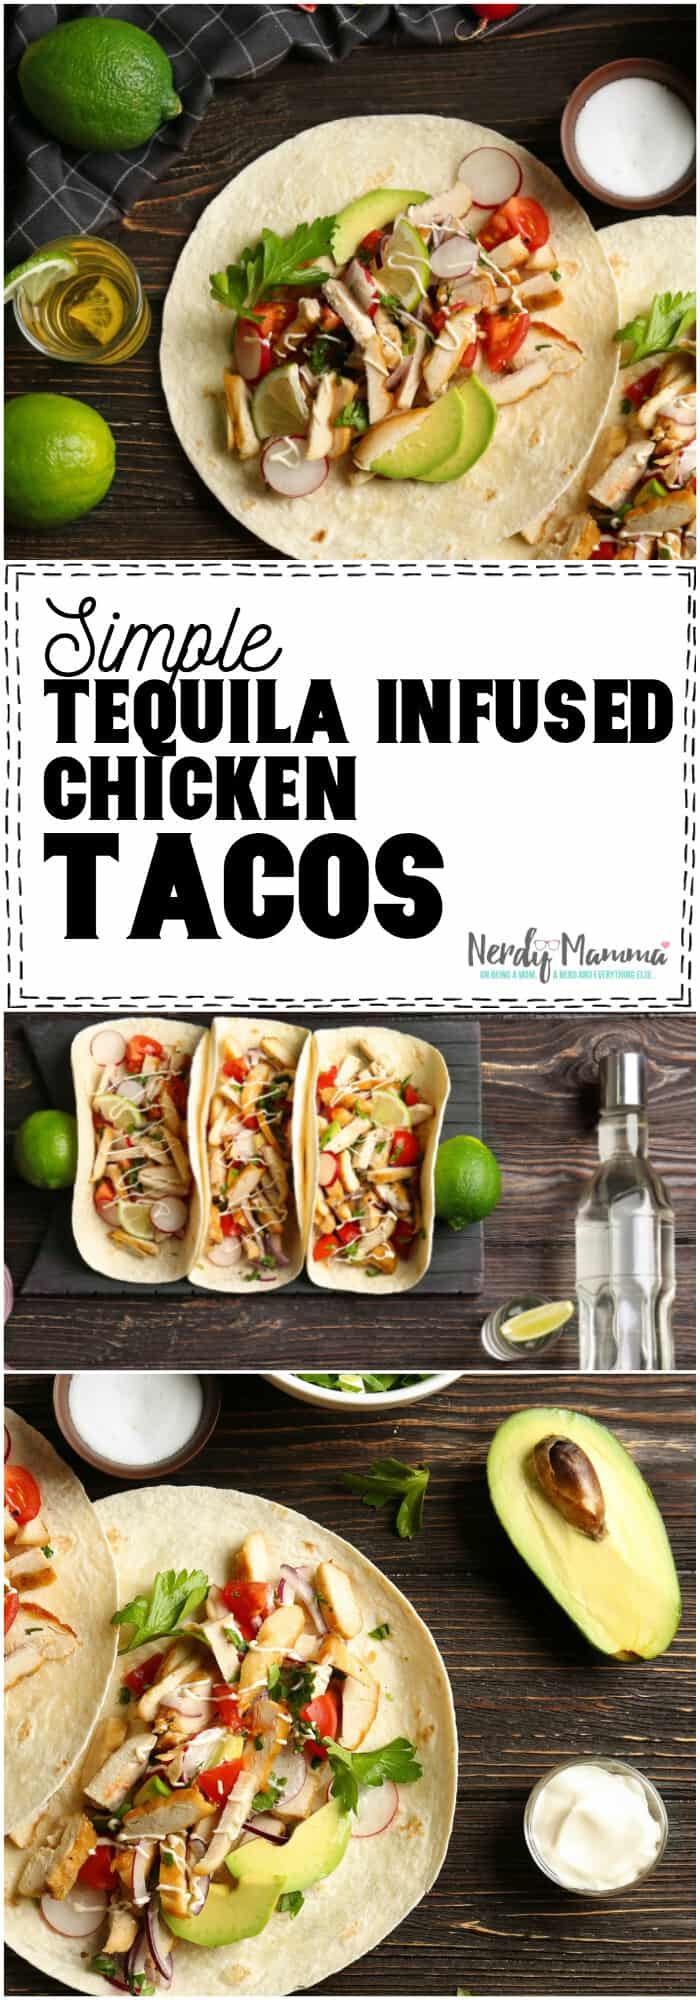 This is the simplest tequila-infused chicken tacos recipe. I love it! #taco #recipe #chickentaco #easy #tequila #tequilataco #yummy #meal #tasty #food